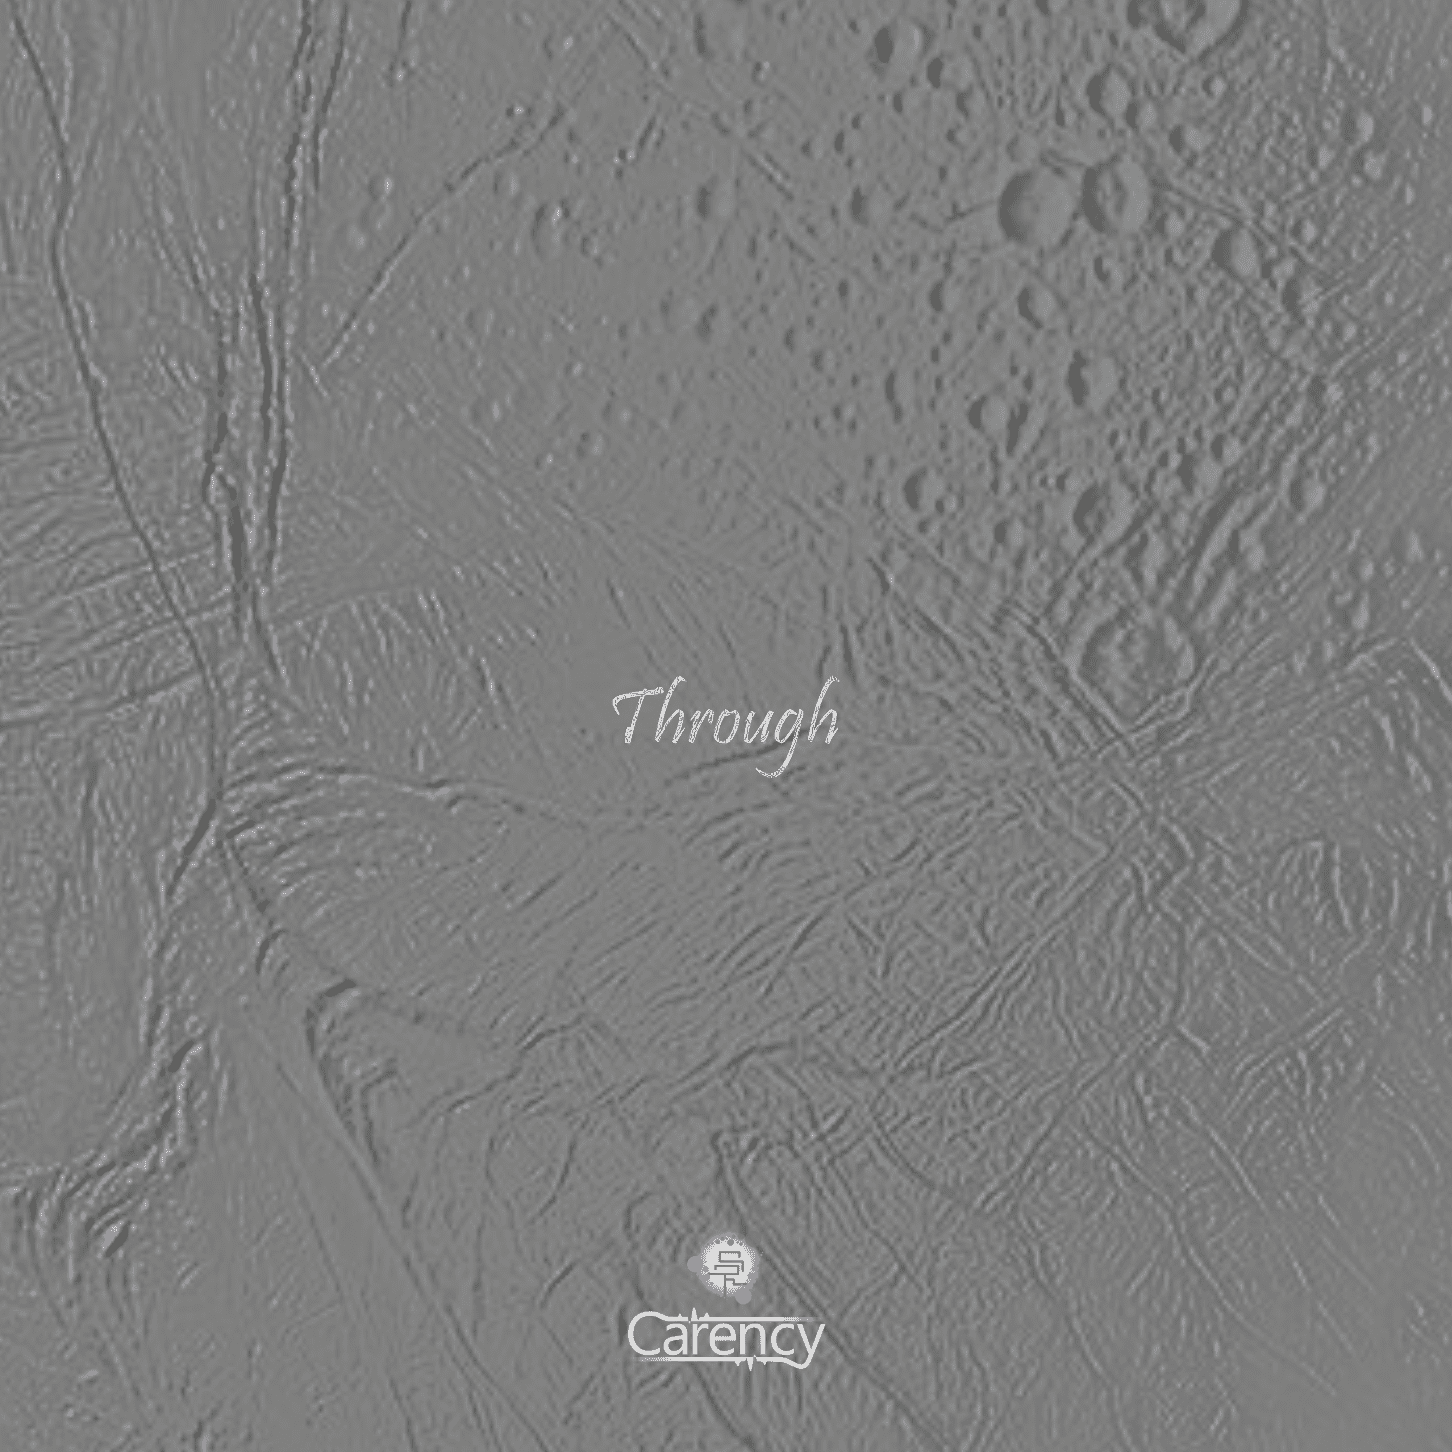 Cover art for Carency's song: Through